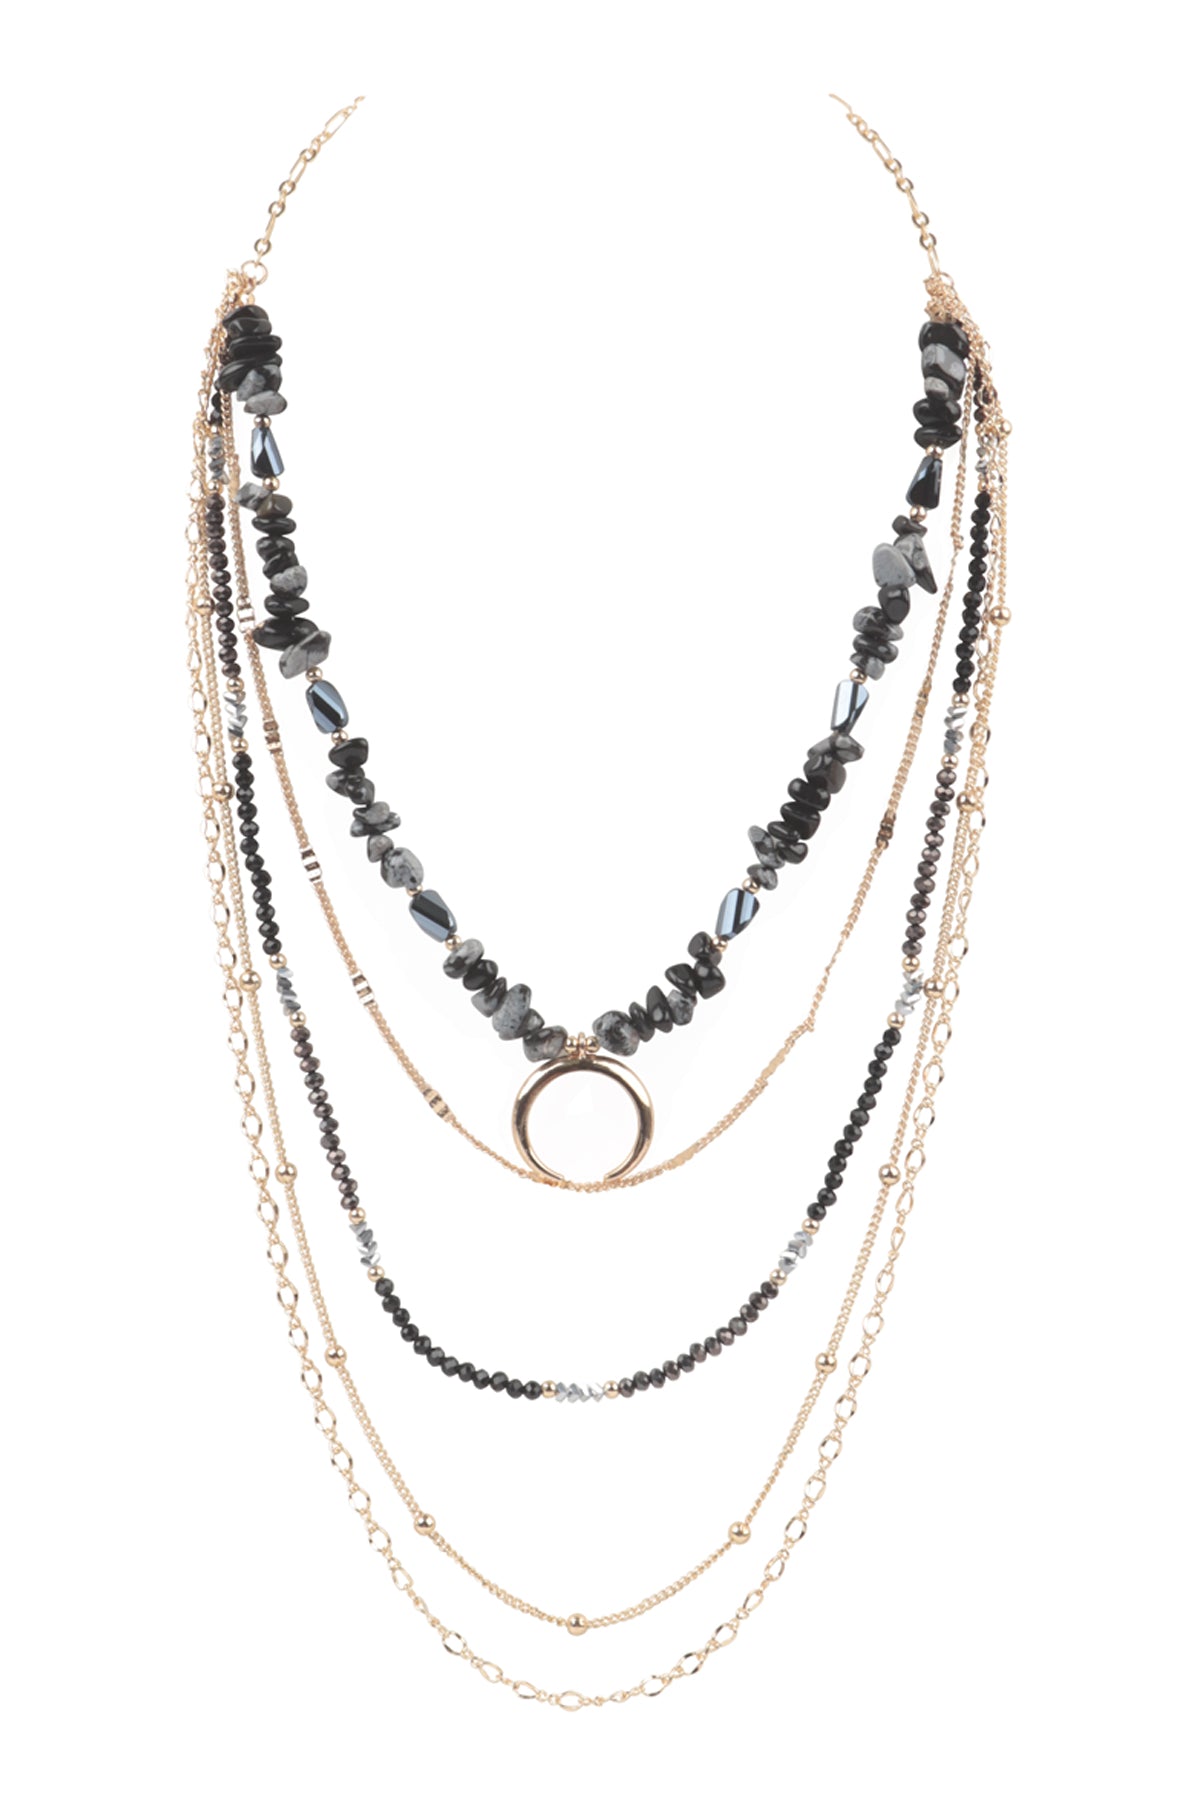 LAYERED CHAIN, NATURAL STONE CHIP MIX BEADS CRESCENT PENDANT NECKLACE